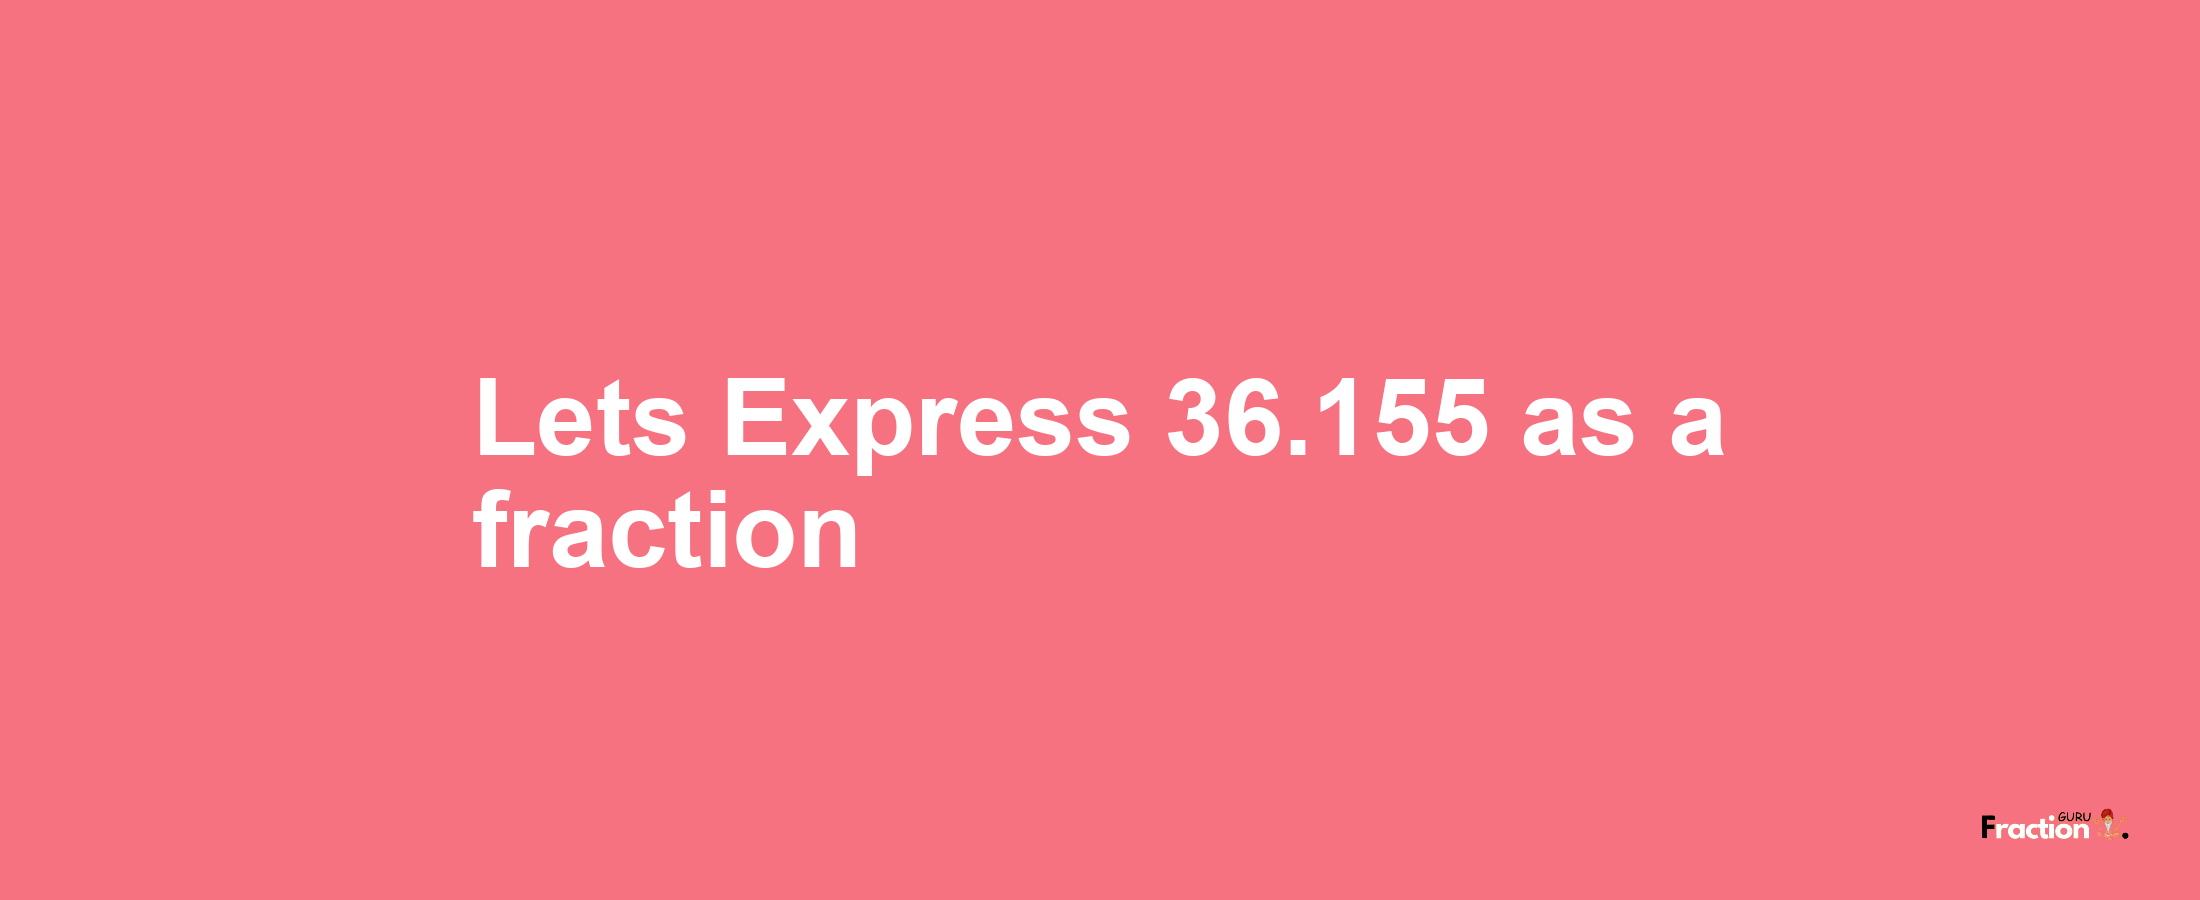 Lets Express 36.155 as afraction